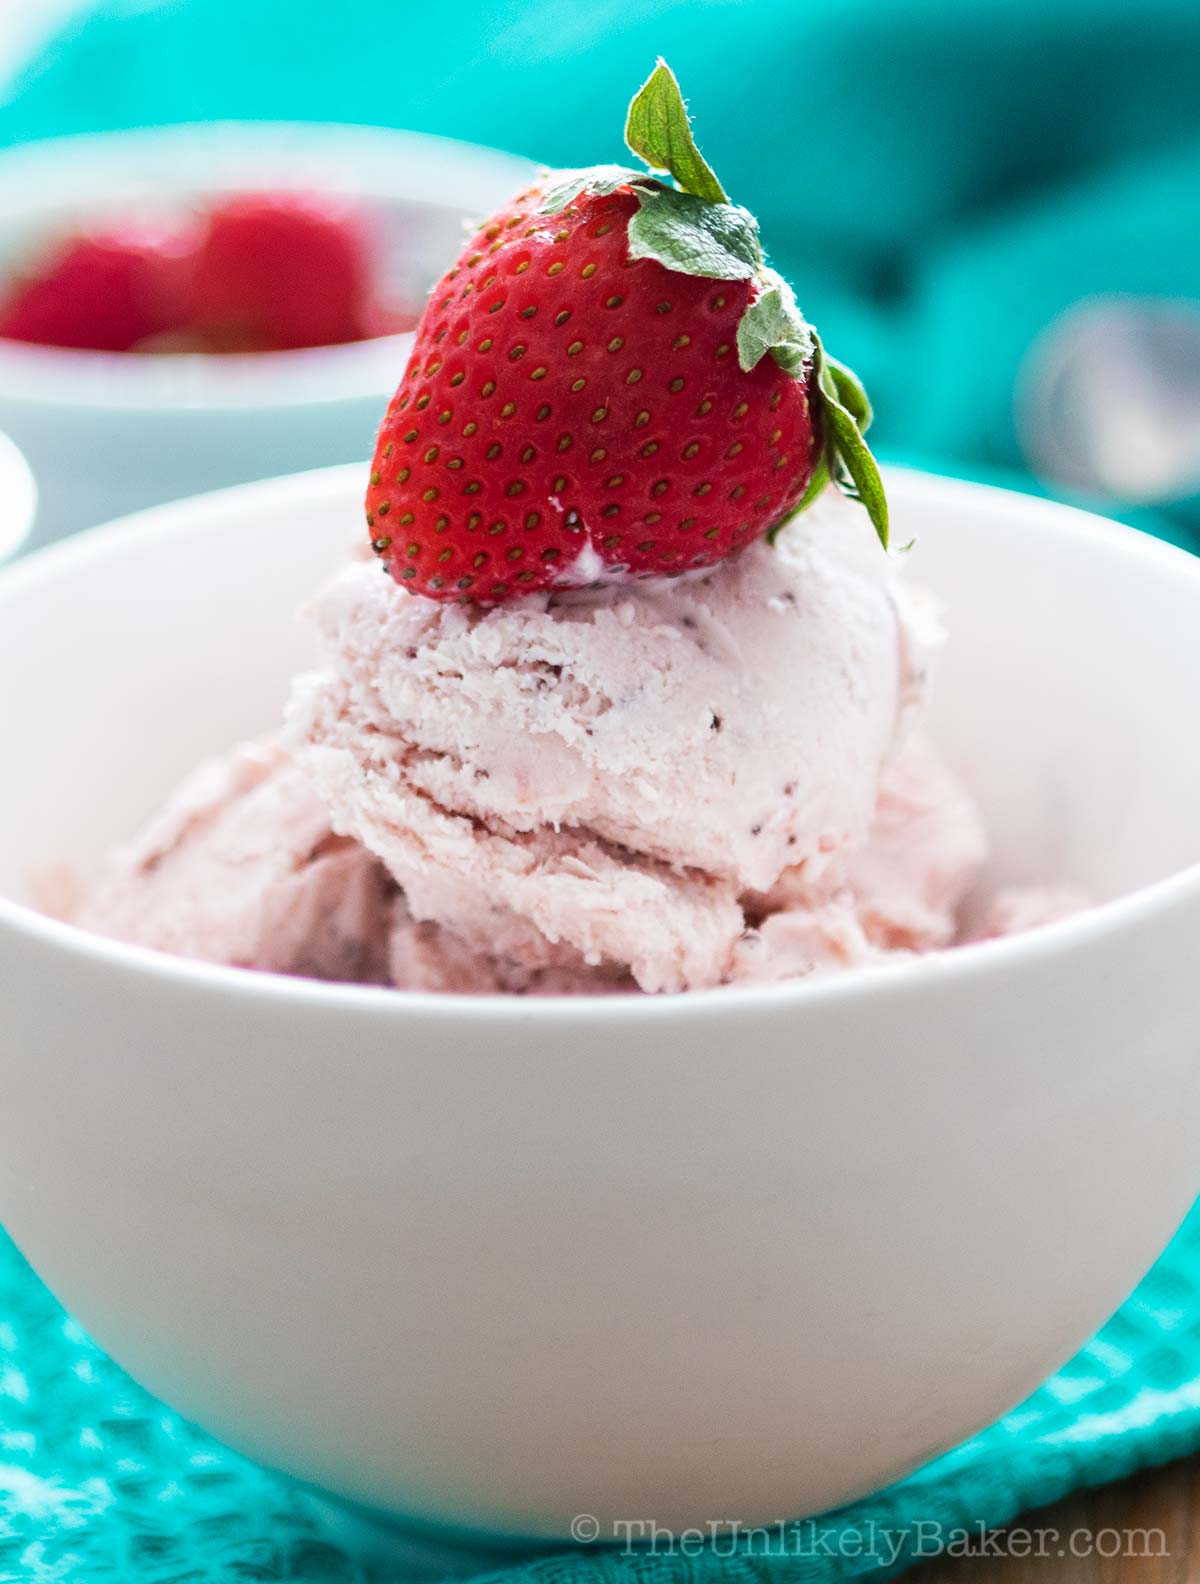 Strawberry chocolate chip ice cream in a bowl.